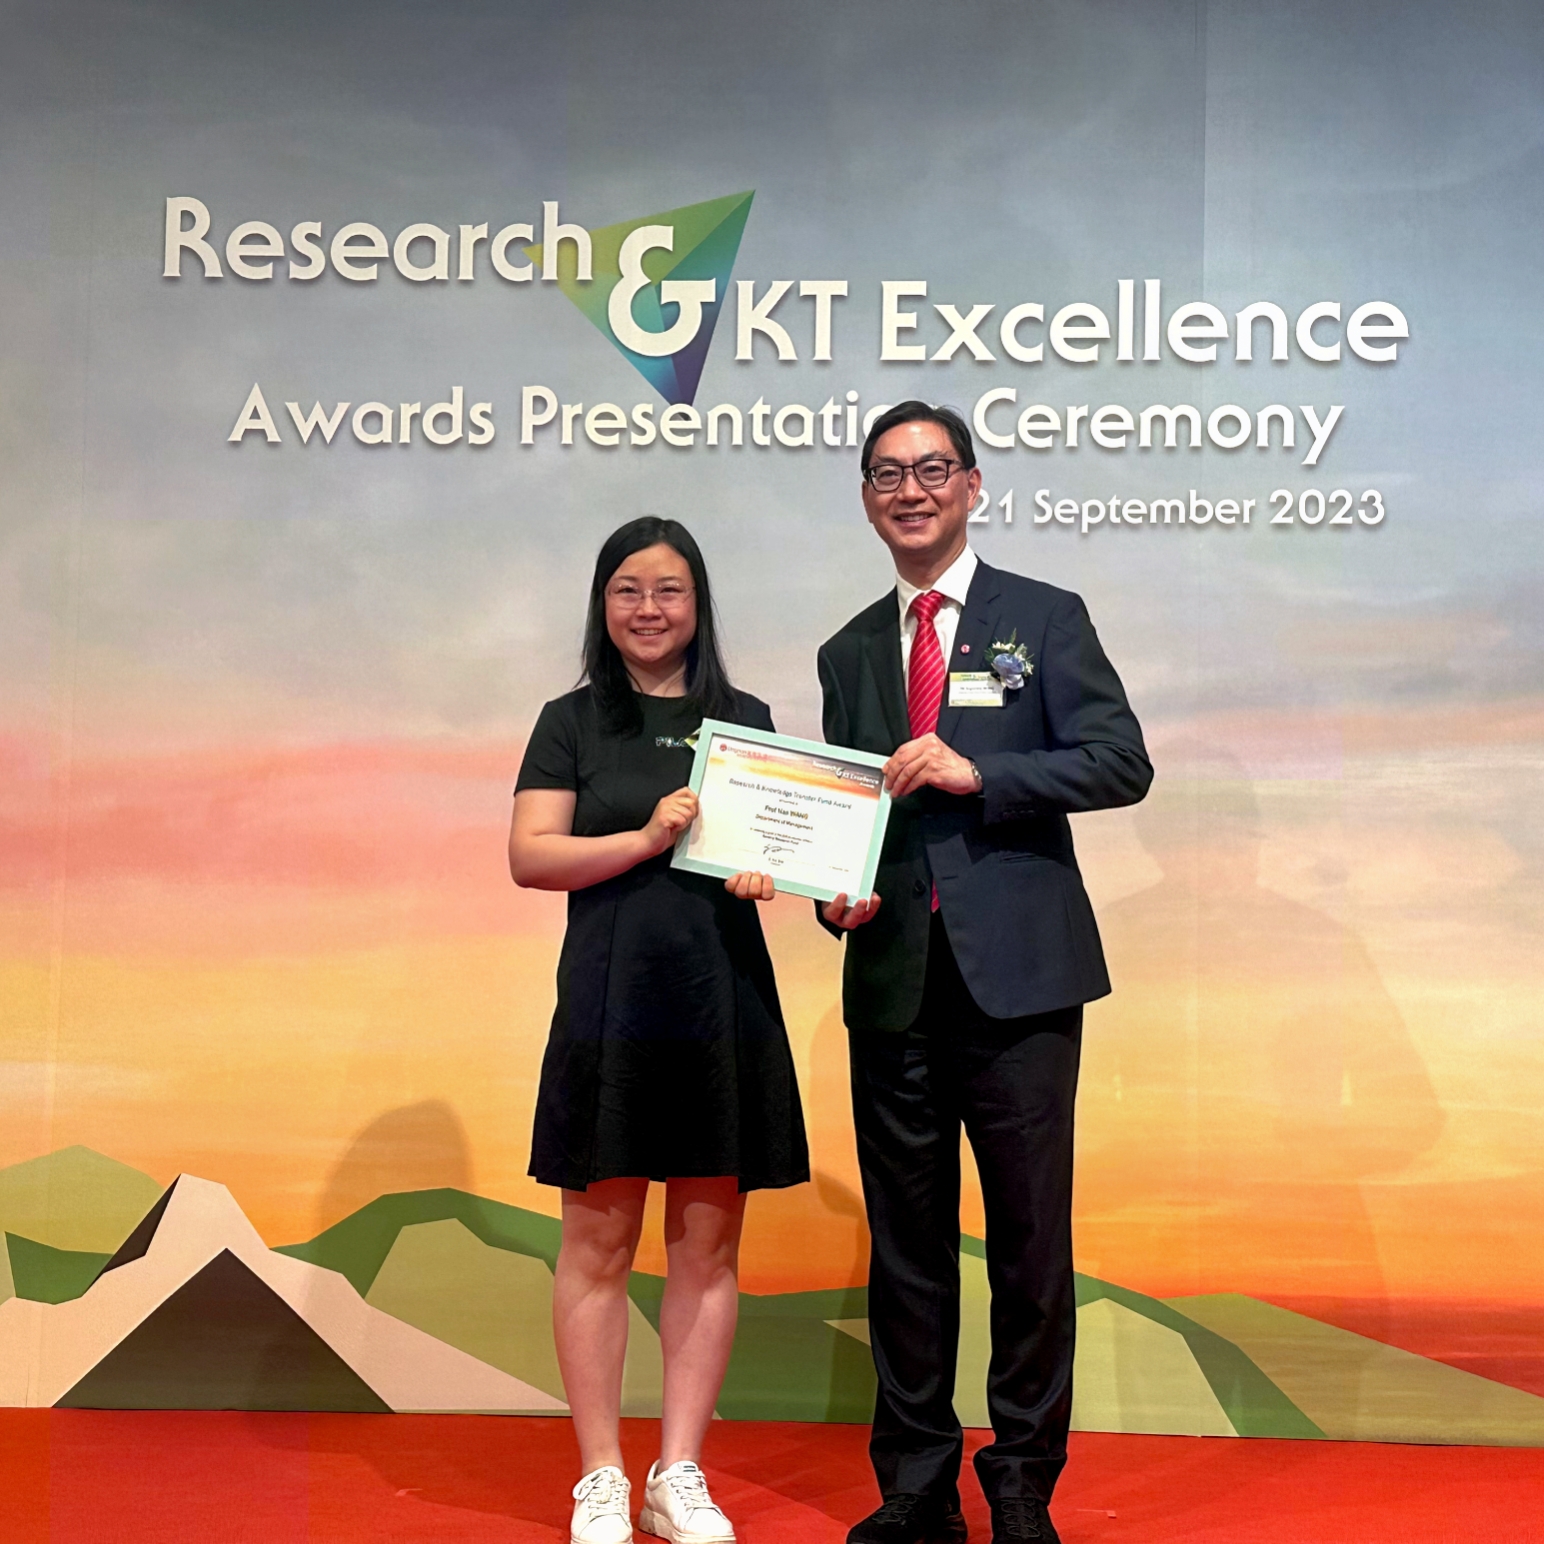 Research & KT Excellence Awards Presentation Ceremony 2023